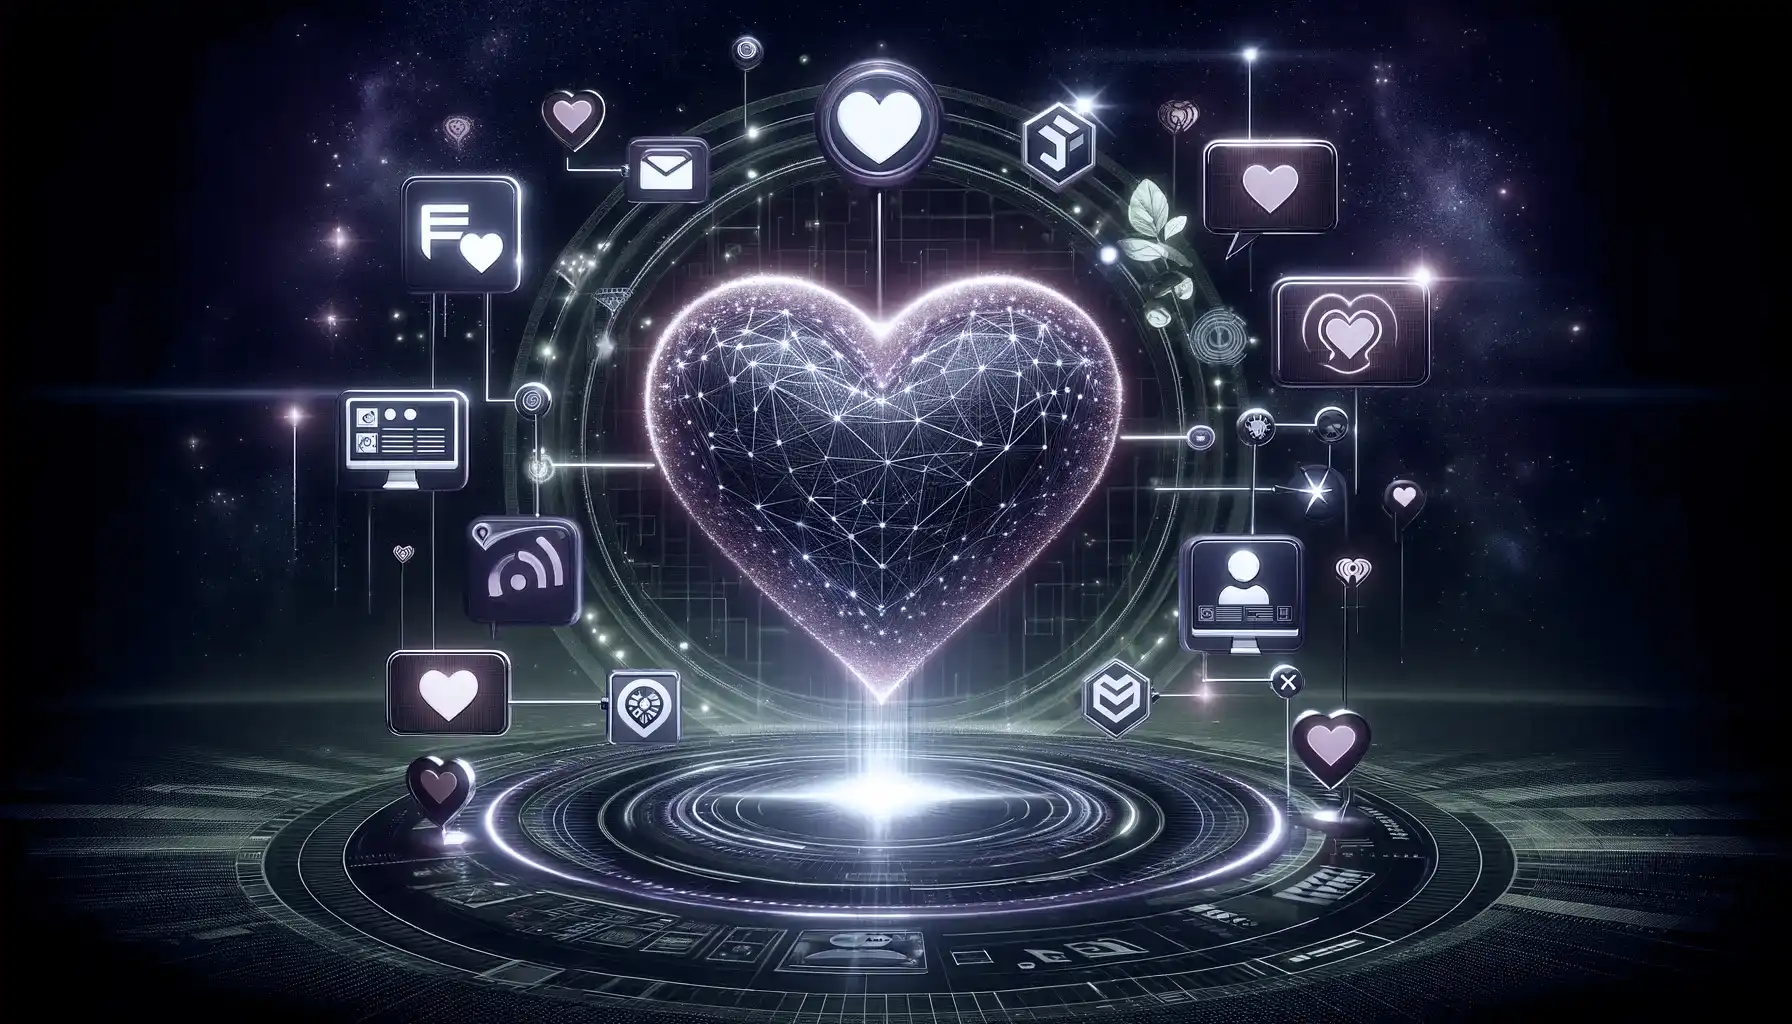 Image depicting how digital technology enhances consumer loyalty to a brand, featuring a large heart symbol at the center, representing consumer affection and loyalty. Surrounding the heart are various digital technology elements like social media icons, customer feedback tools, and personalized marketing strategies, illustrating the role of digital innovations in improving customer experience and engagement. The entire scene is enveloped in neon green and purple lights, creating a vibrant and futuristic ambiance. This symbolizes the strong connection between technology and brand loyalty. The abstract background underscores the impact of digital technology in forging solid consumer-brand relationships